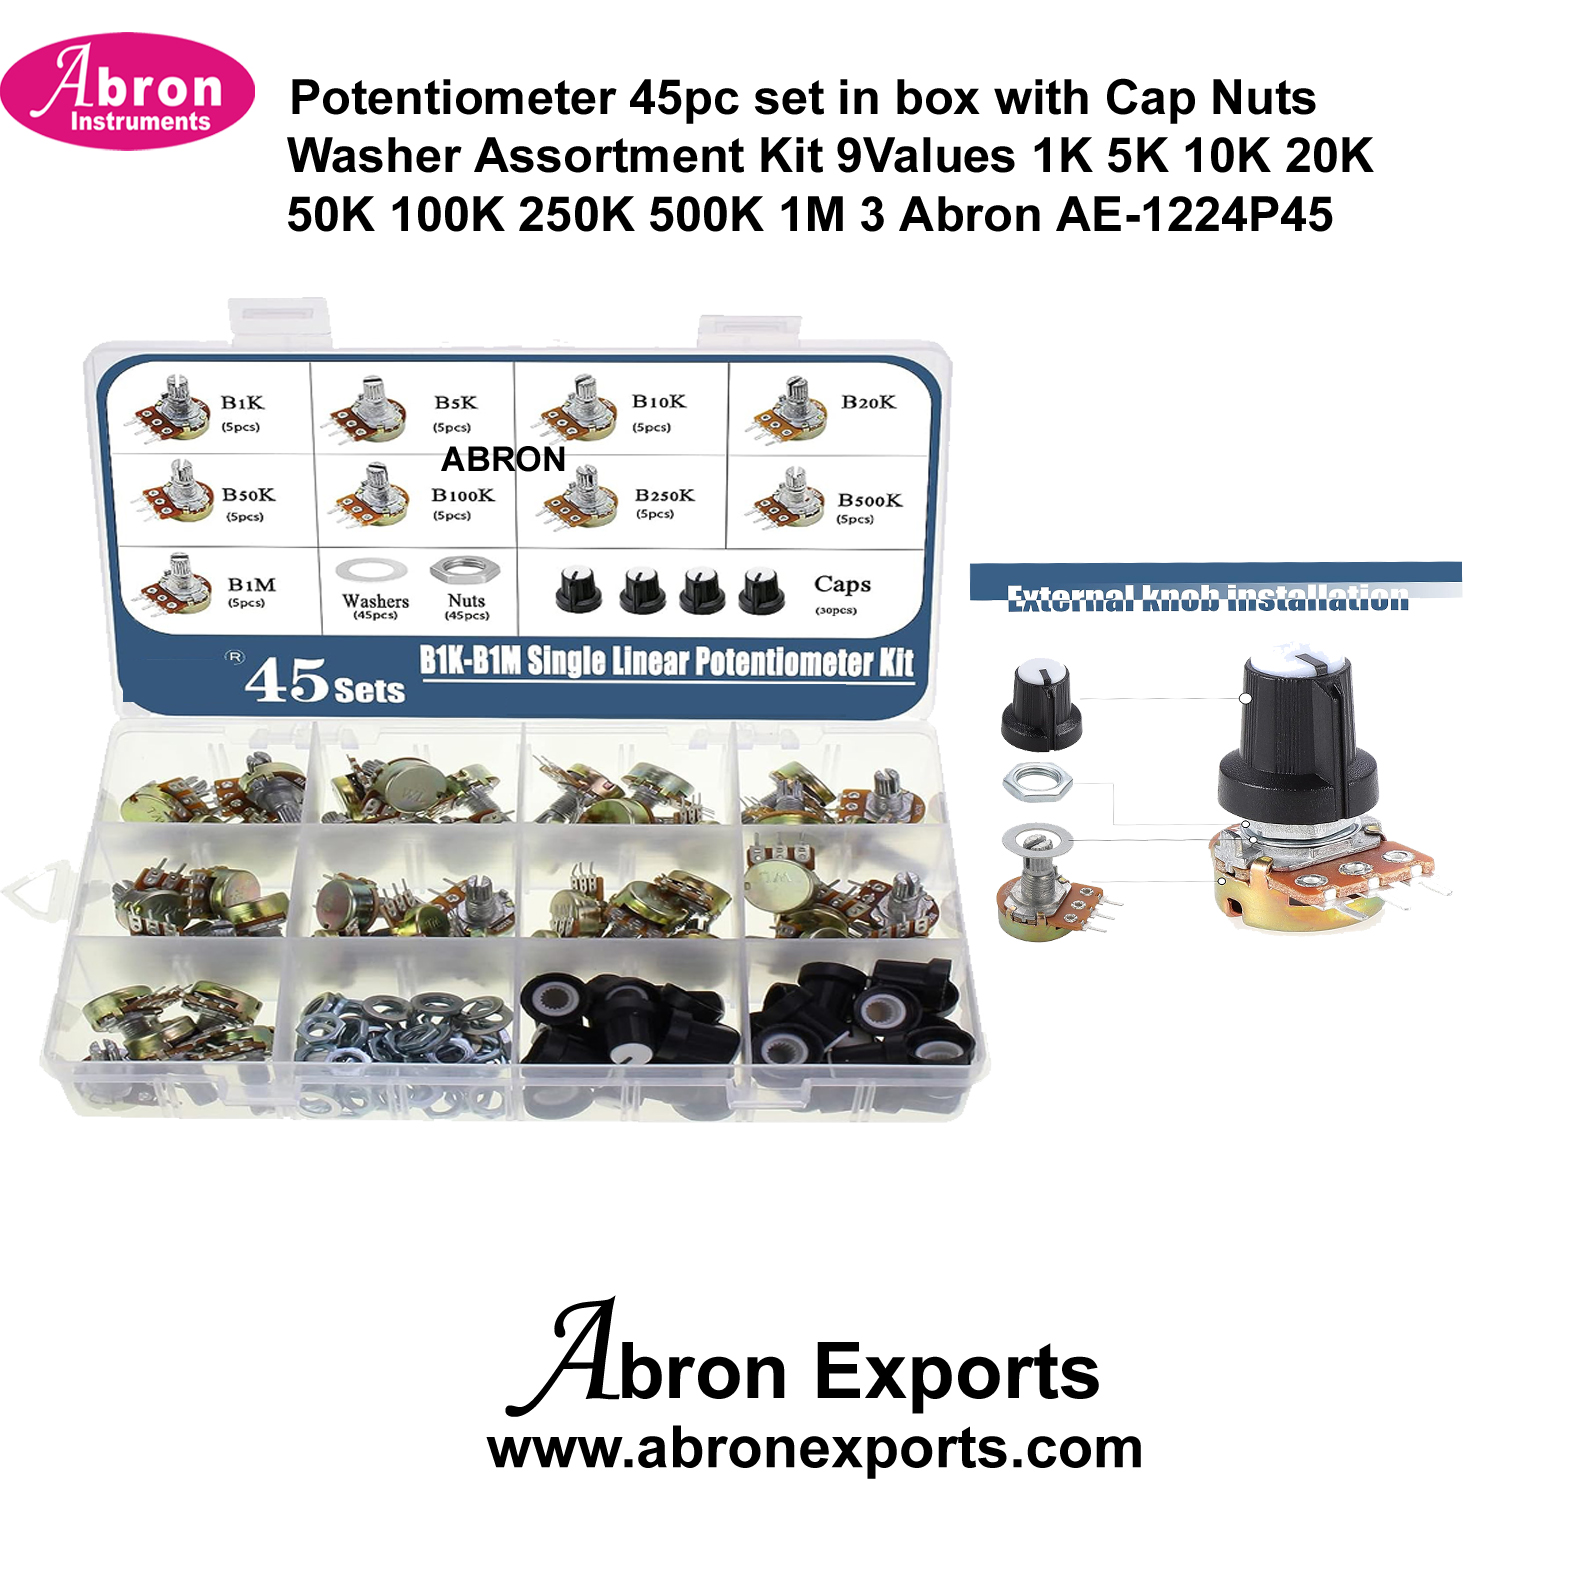 Potentiometer 45 pc set in box with Cap Nuts and Washer Assortment Kit 9 Values 1K 5K 10K 20K 50K 100K 250K 500K 1M 3 Abron AE-1224P45 